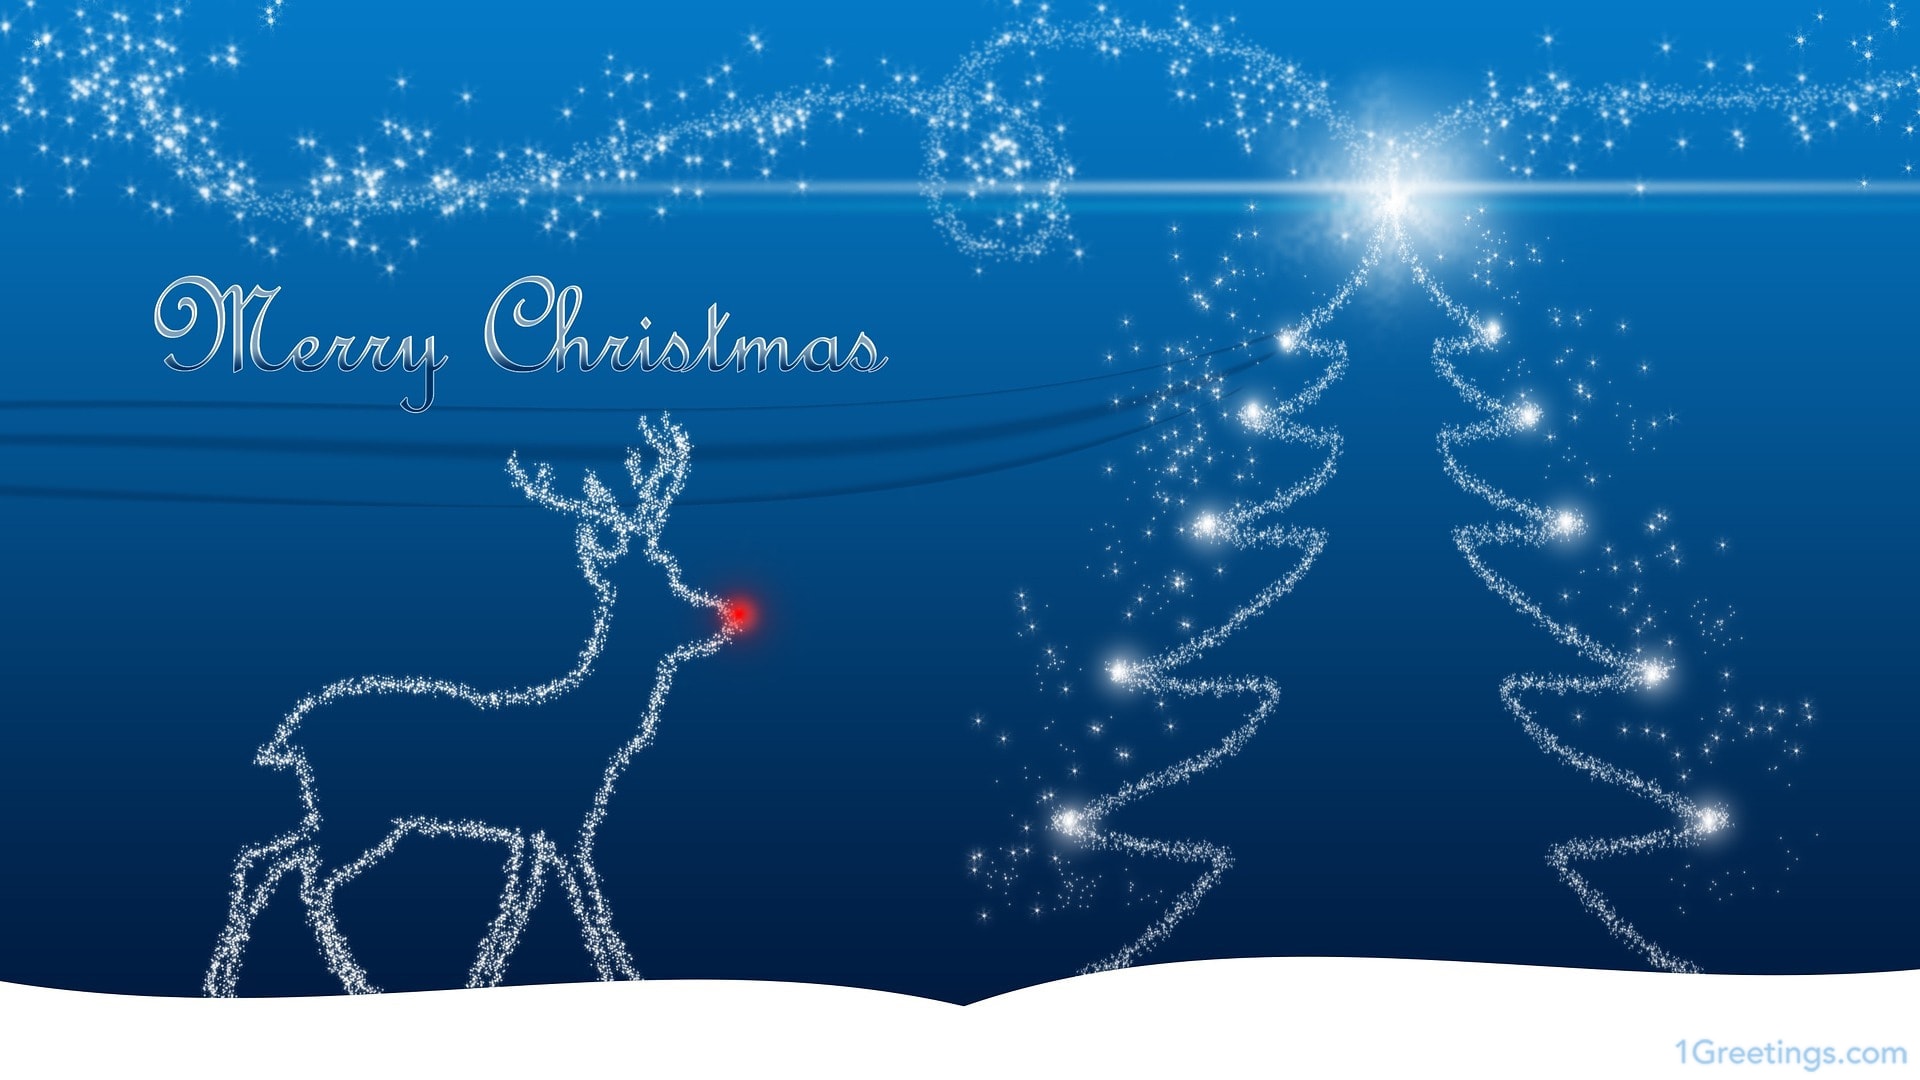 Merry Christmas Wallpaper Full HD Free Download - Images 10